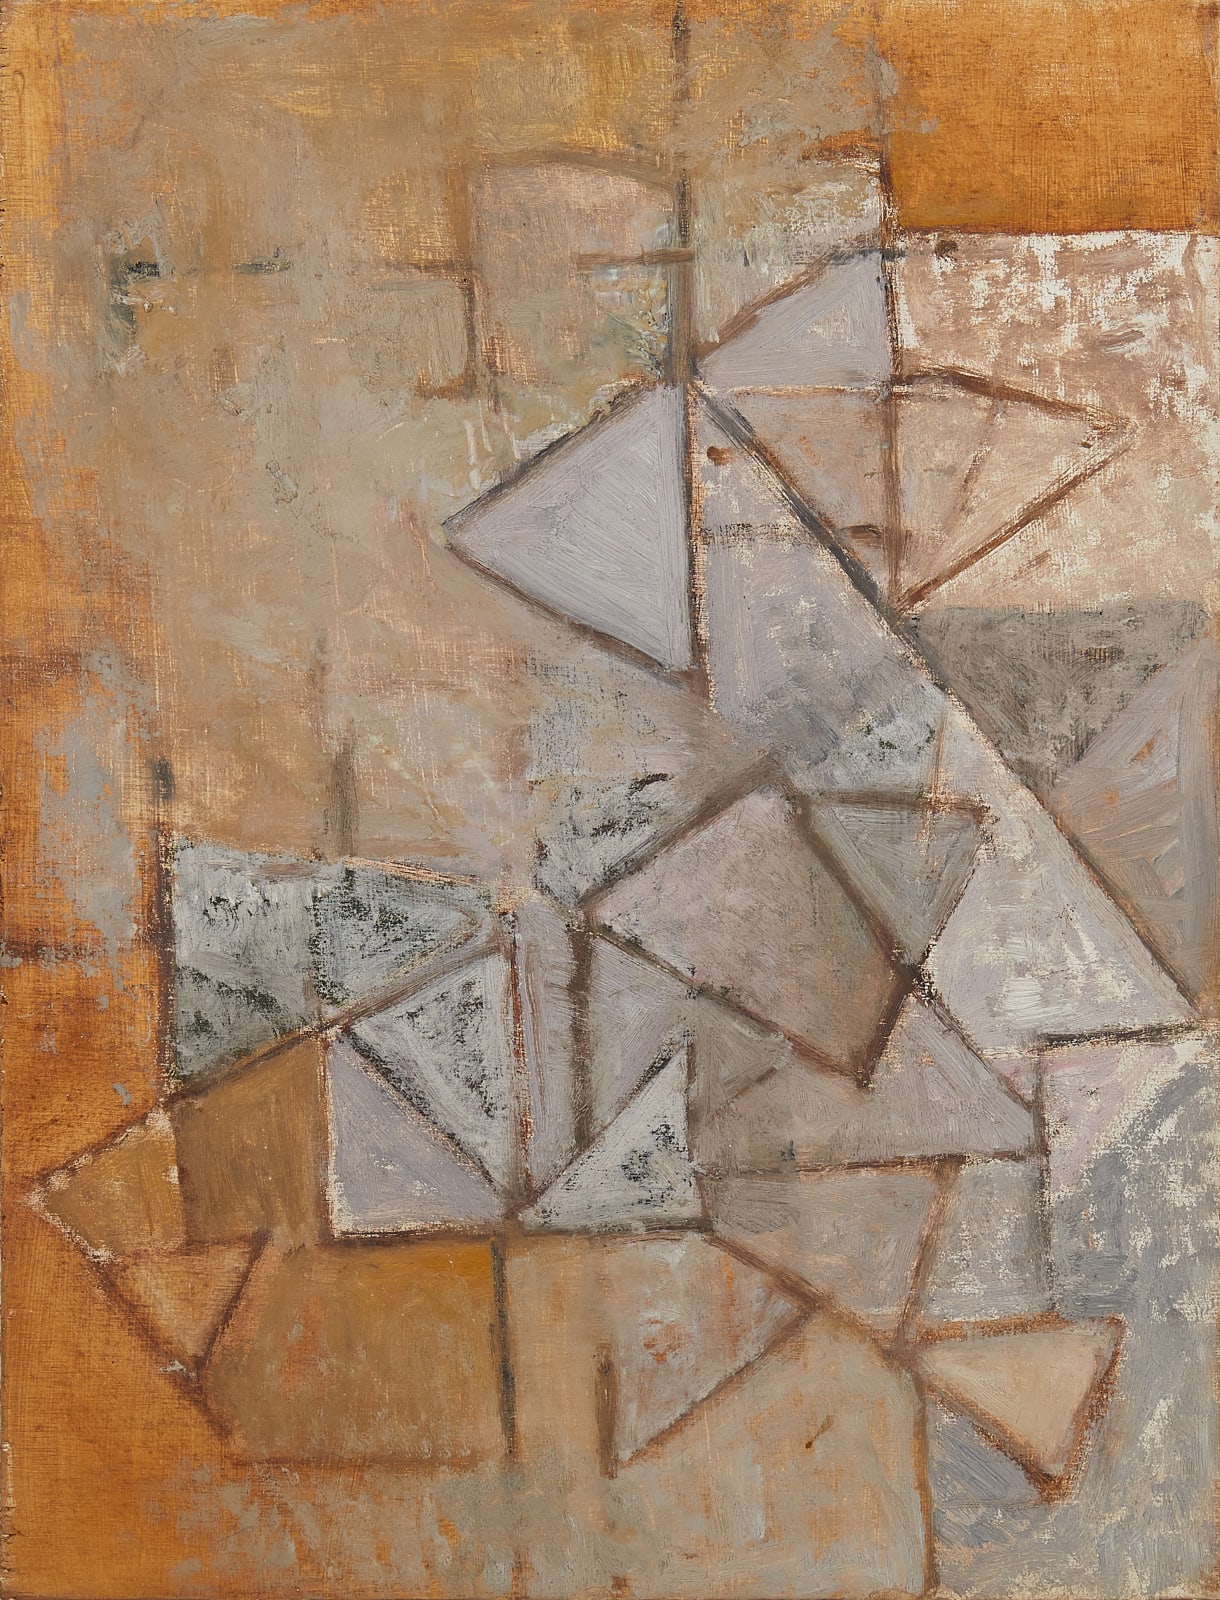 Wendy Pasmore, Triangular Motif, Lilac and Ochre, 1956